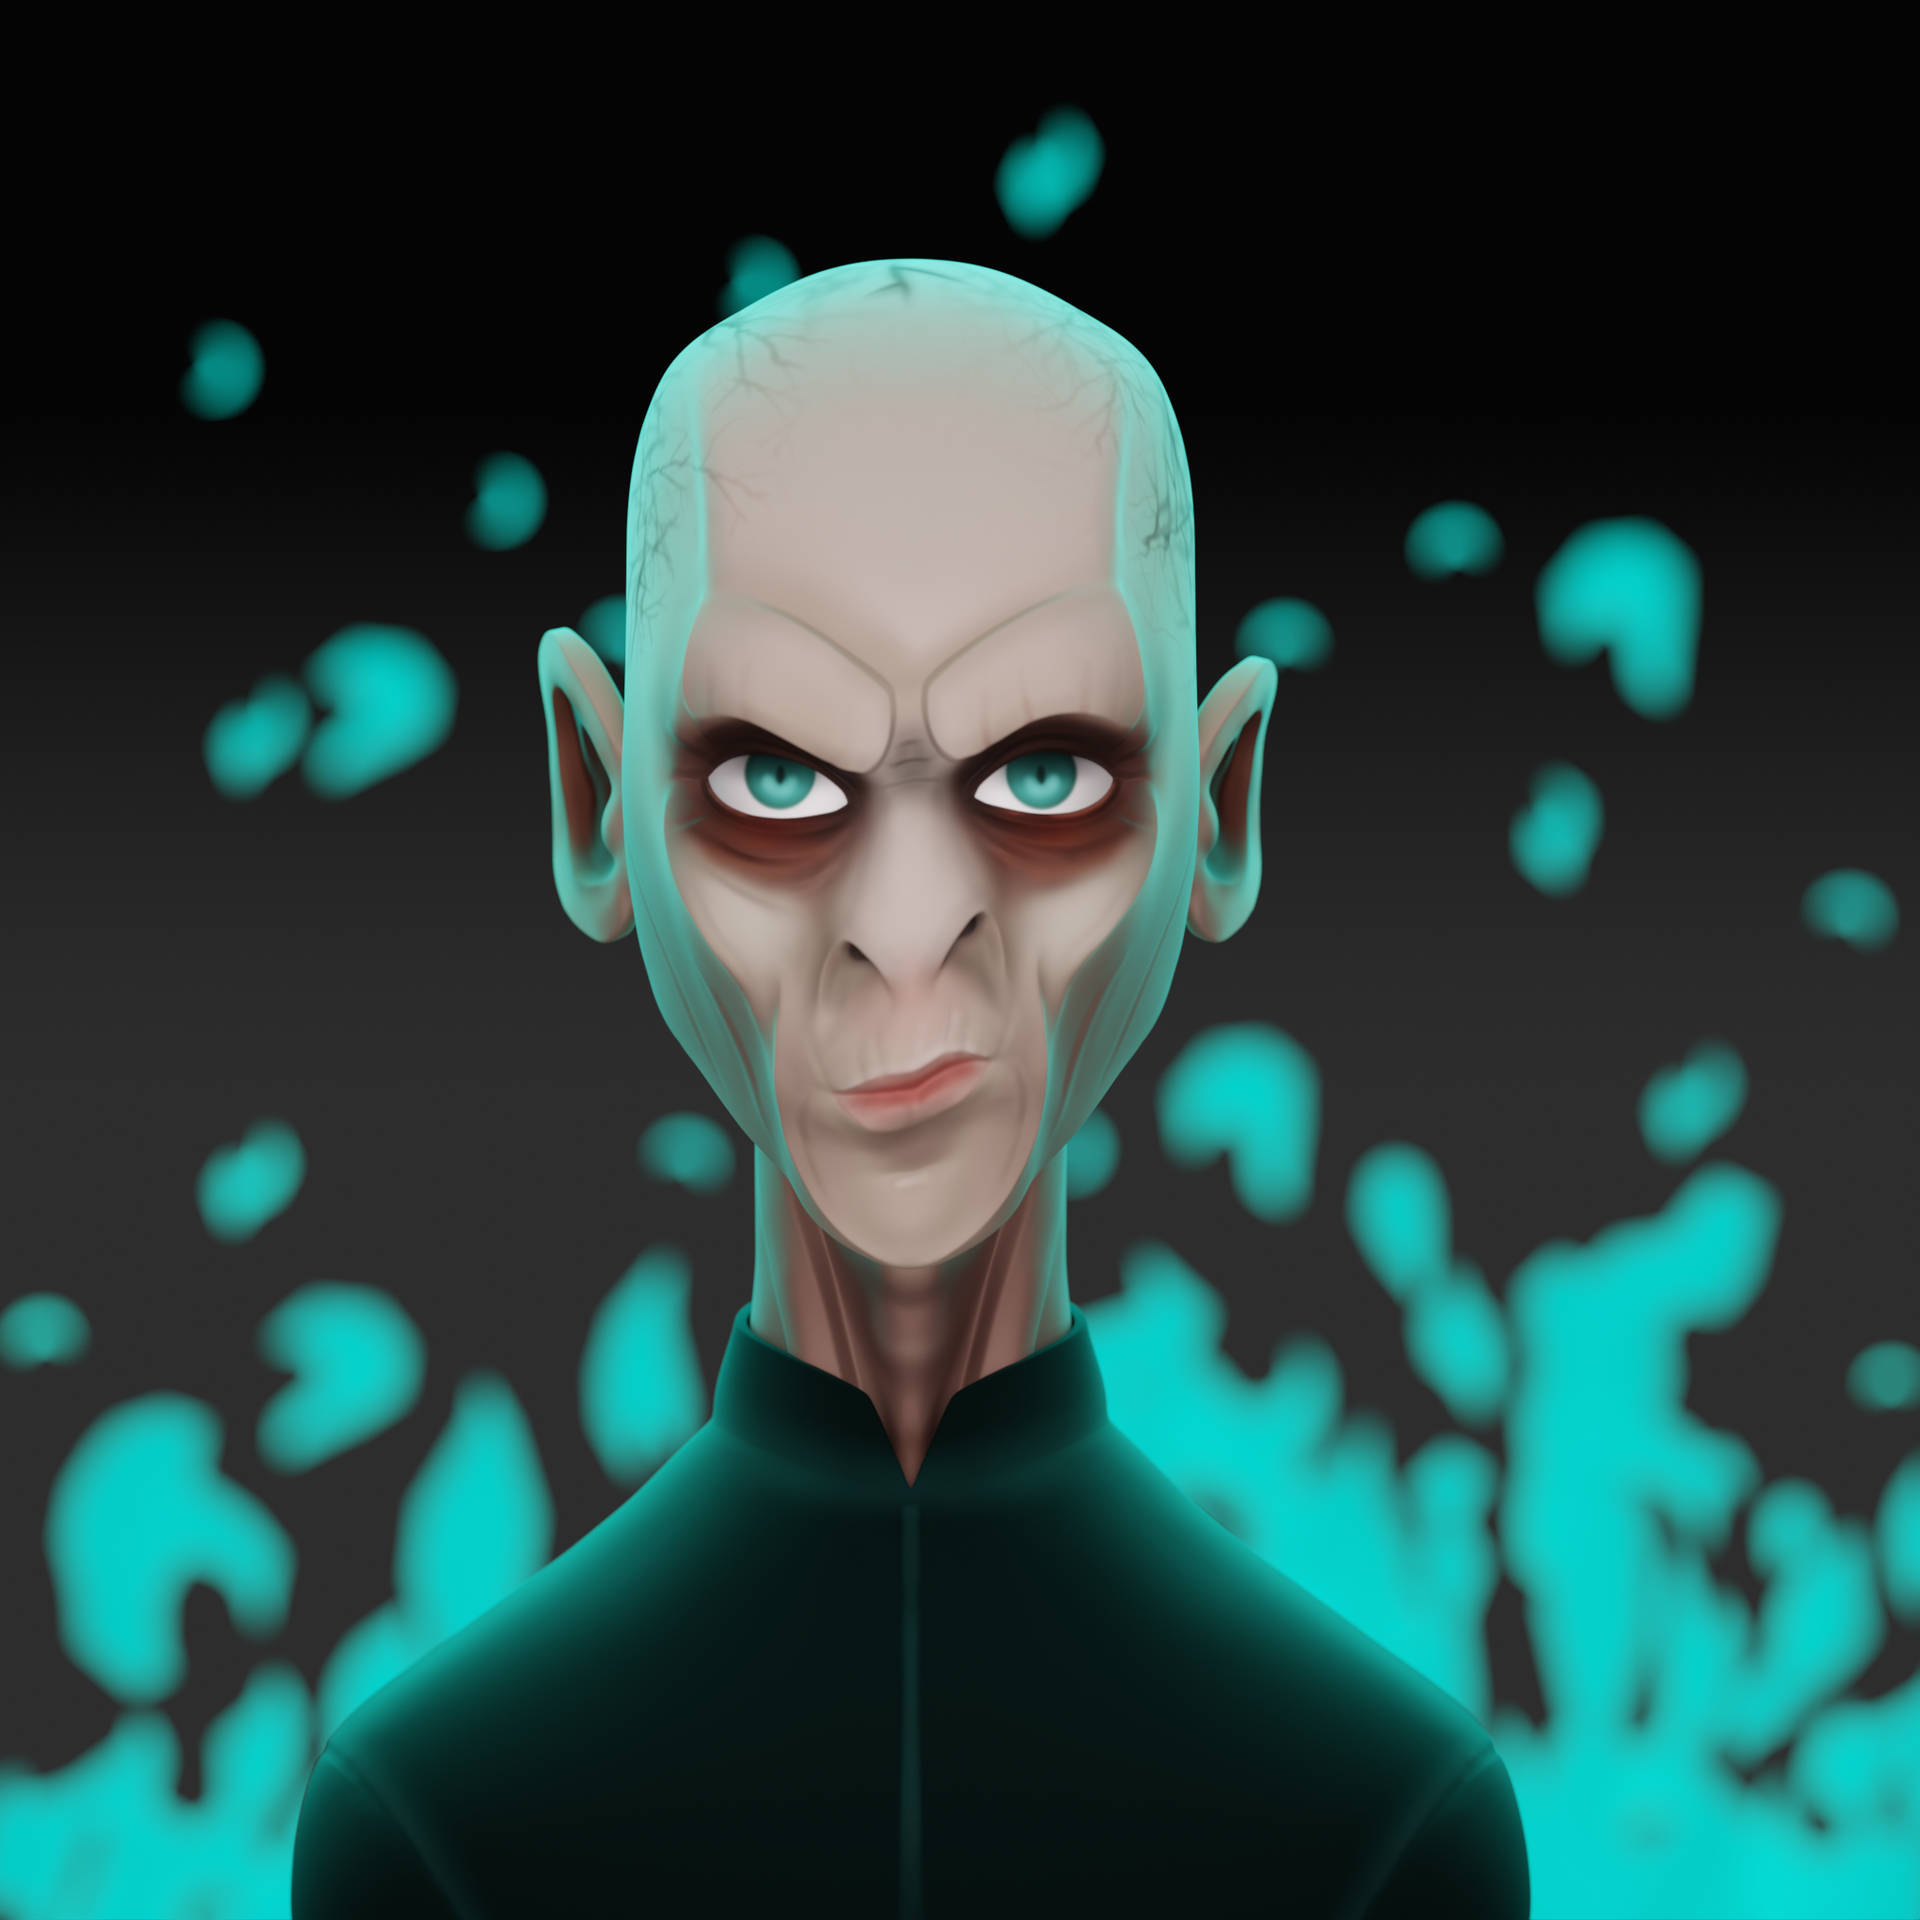 Top 999+ Lord Voldemort Wallpaper Full HD, 4K Free to Use